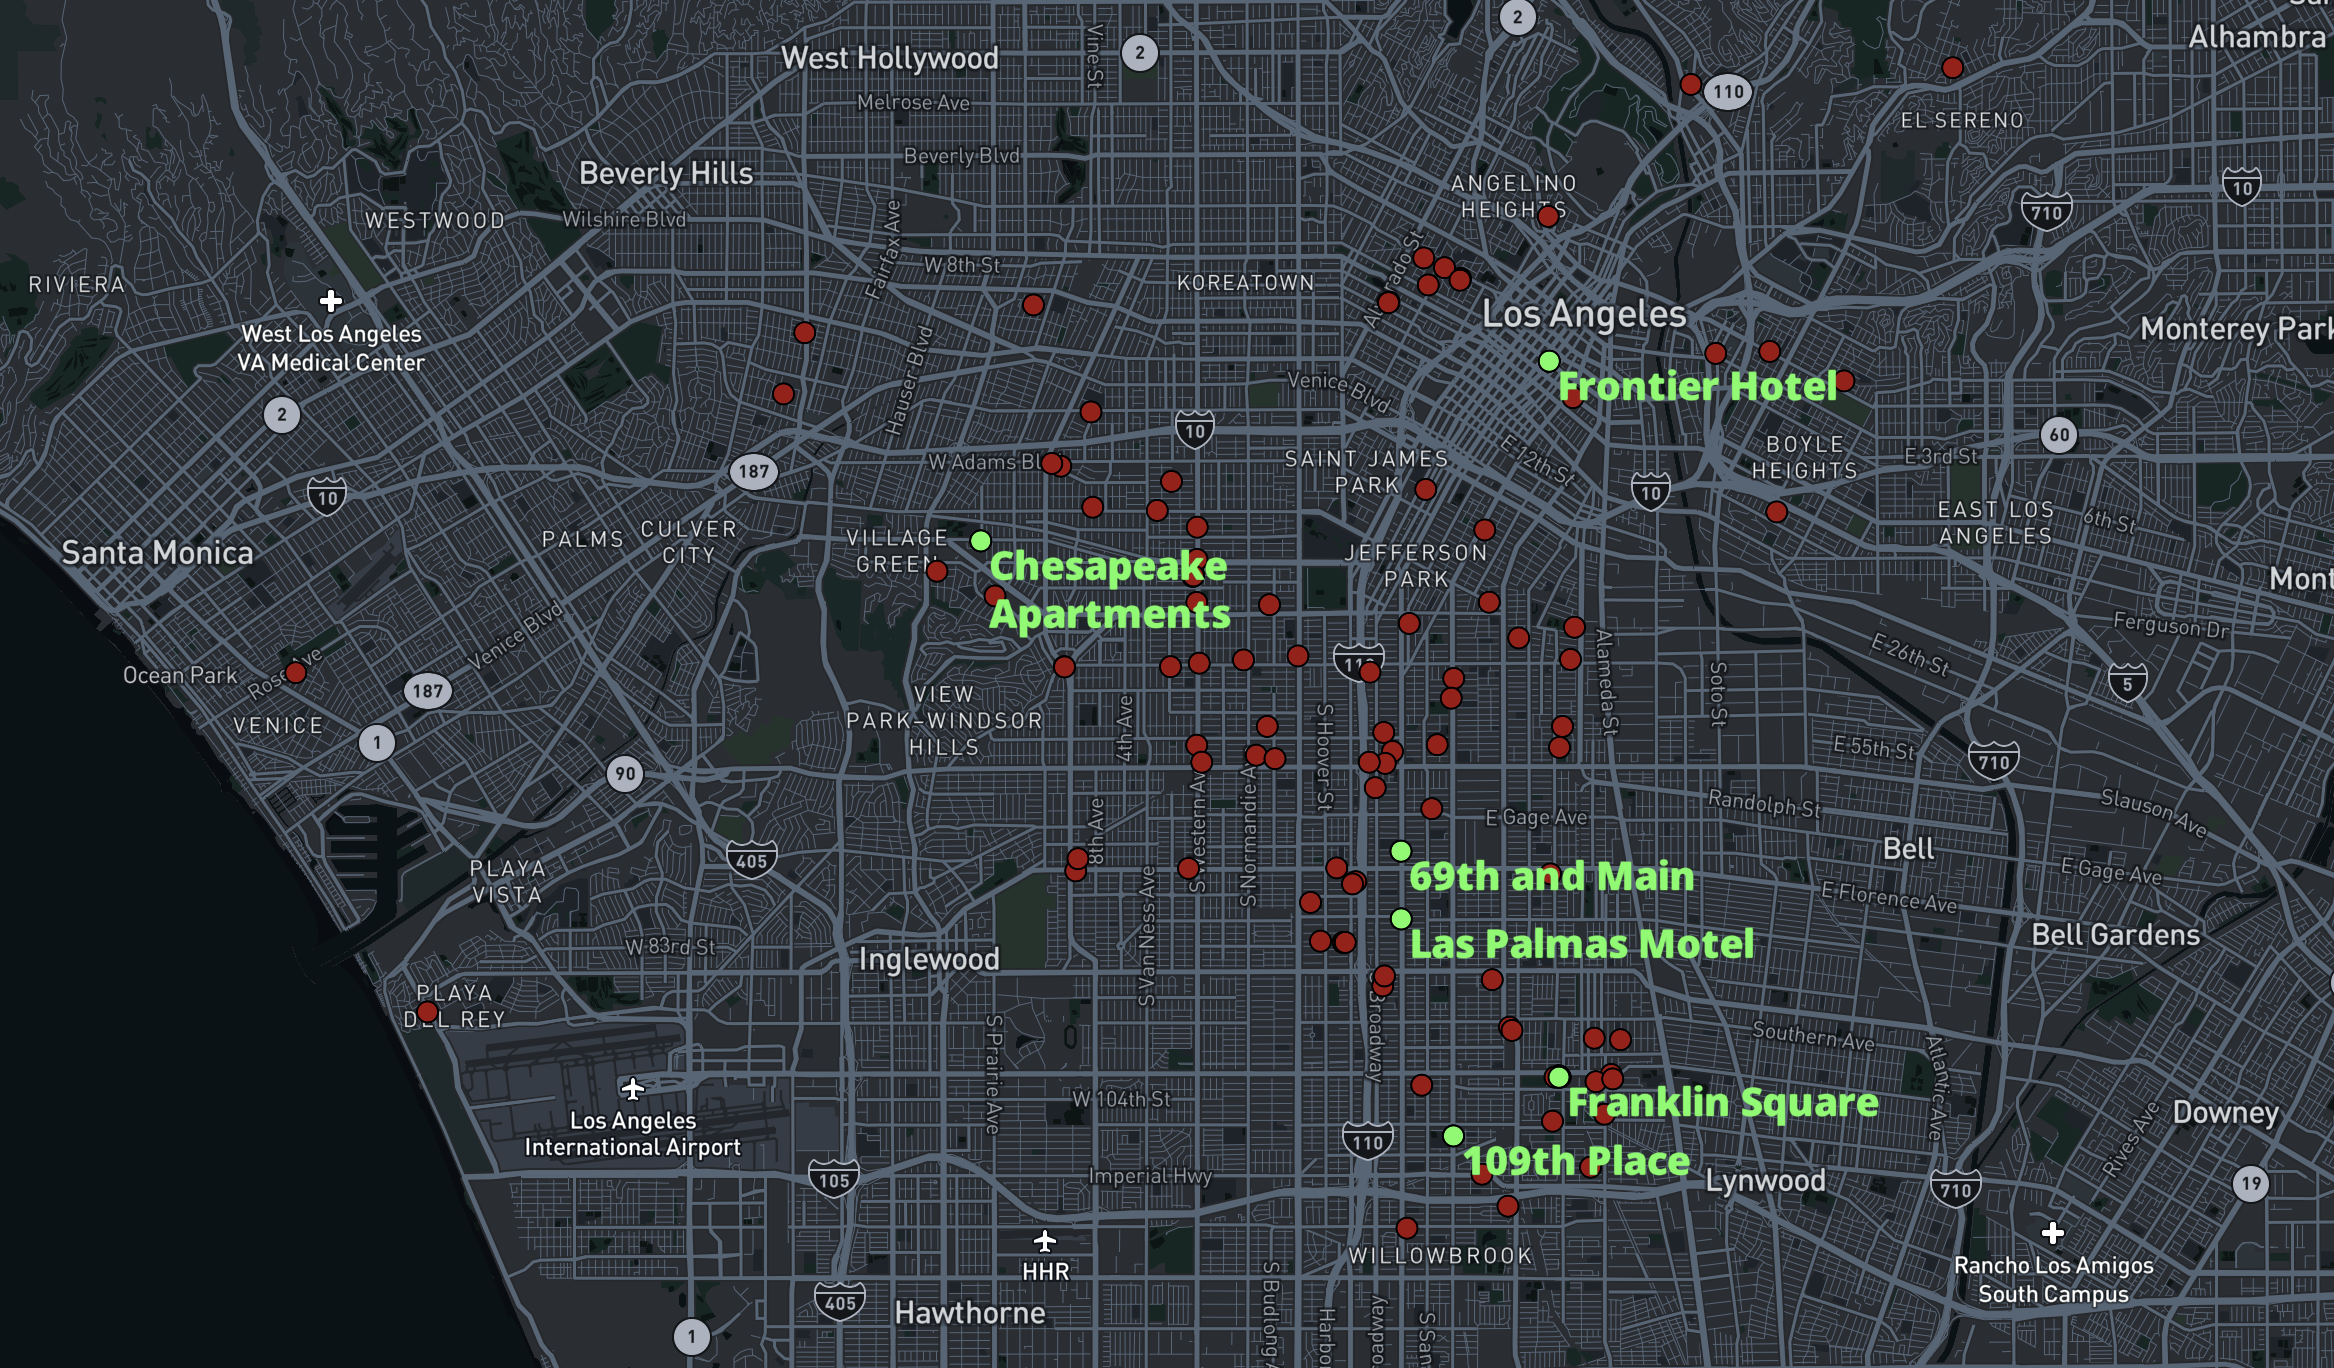 This image from the Anti-Eviction Mapping Project website is a map of Los Angeles City in gray. The map contains over 100 small red dots across the city, and they are largely concentrated in the central and southeast regions of the city. There are six bright green dots labeled with the names of the buildings they represent: “Chesapeake Apartments,” “Frontier Hotel,” “69th and Main,” “Los Palmas Hotel,” “Franklin Square,” and “109th Place.” The properties in green are also in the central and southeast regions of the city.